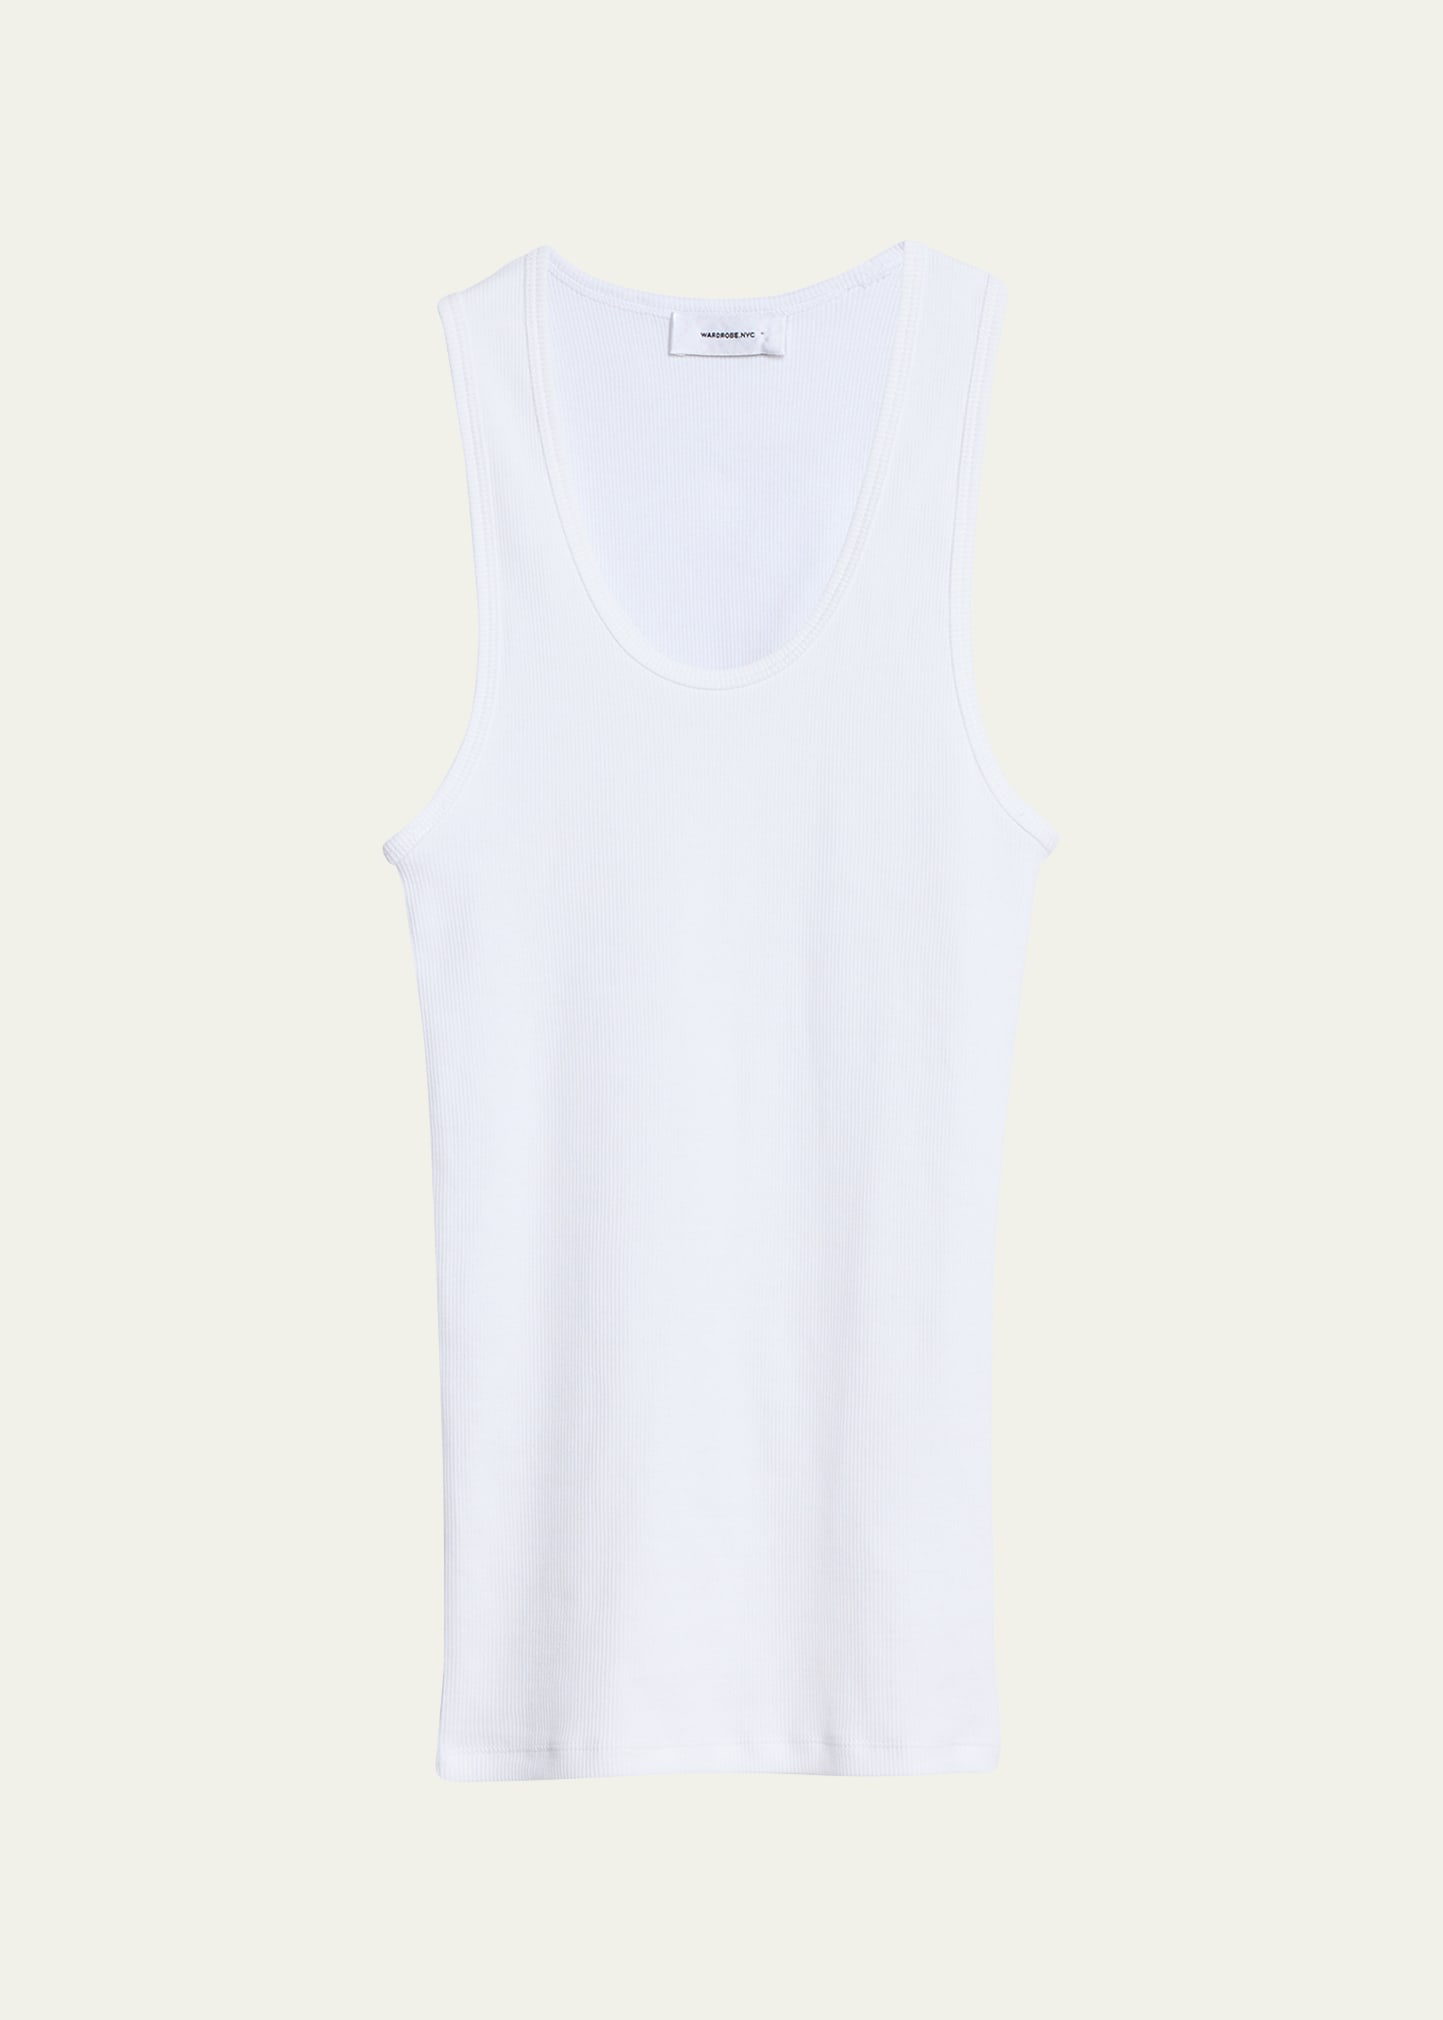 Wardrobe.nyc Scoop-neck Ribbed Tank Top In White